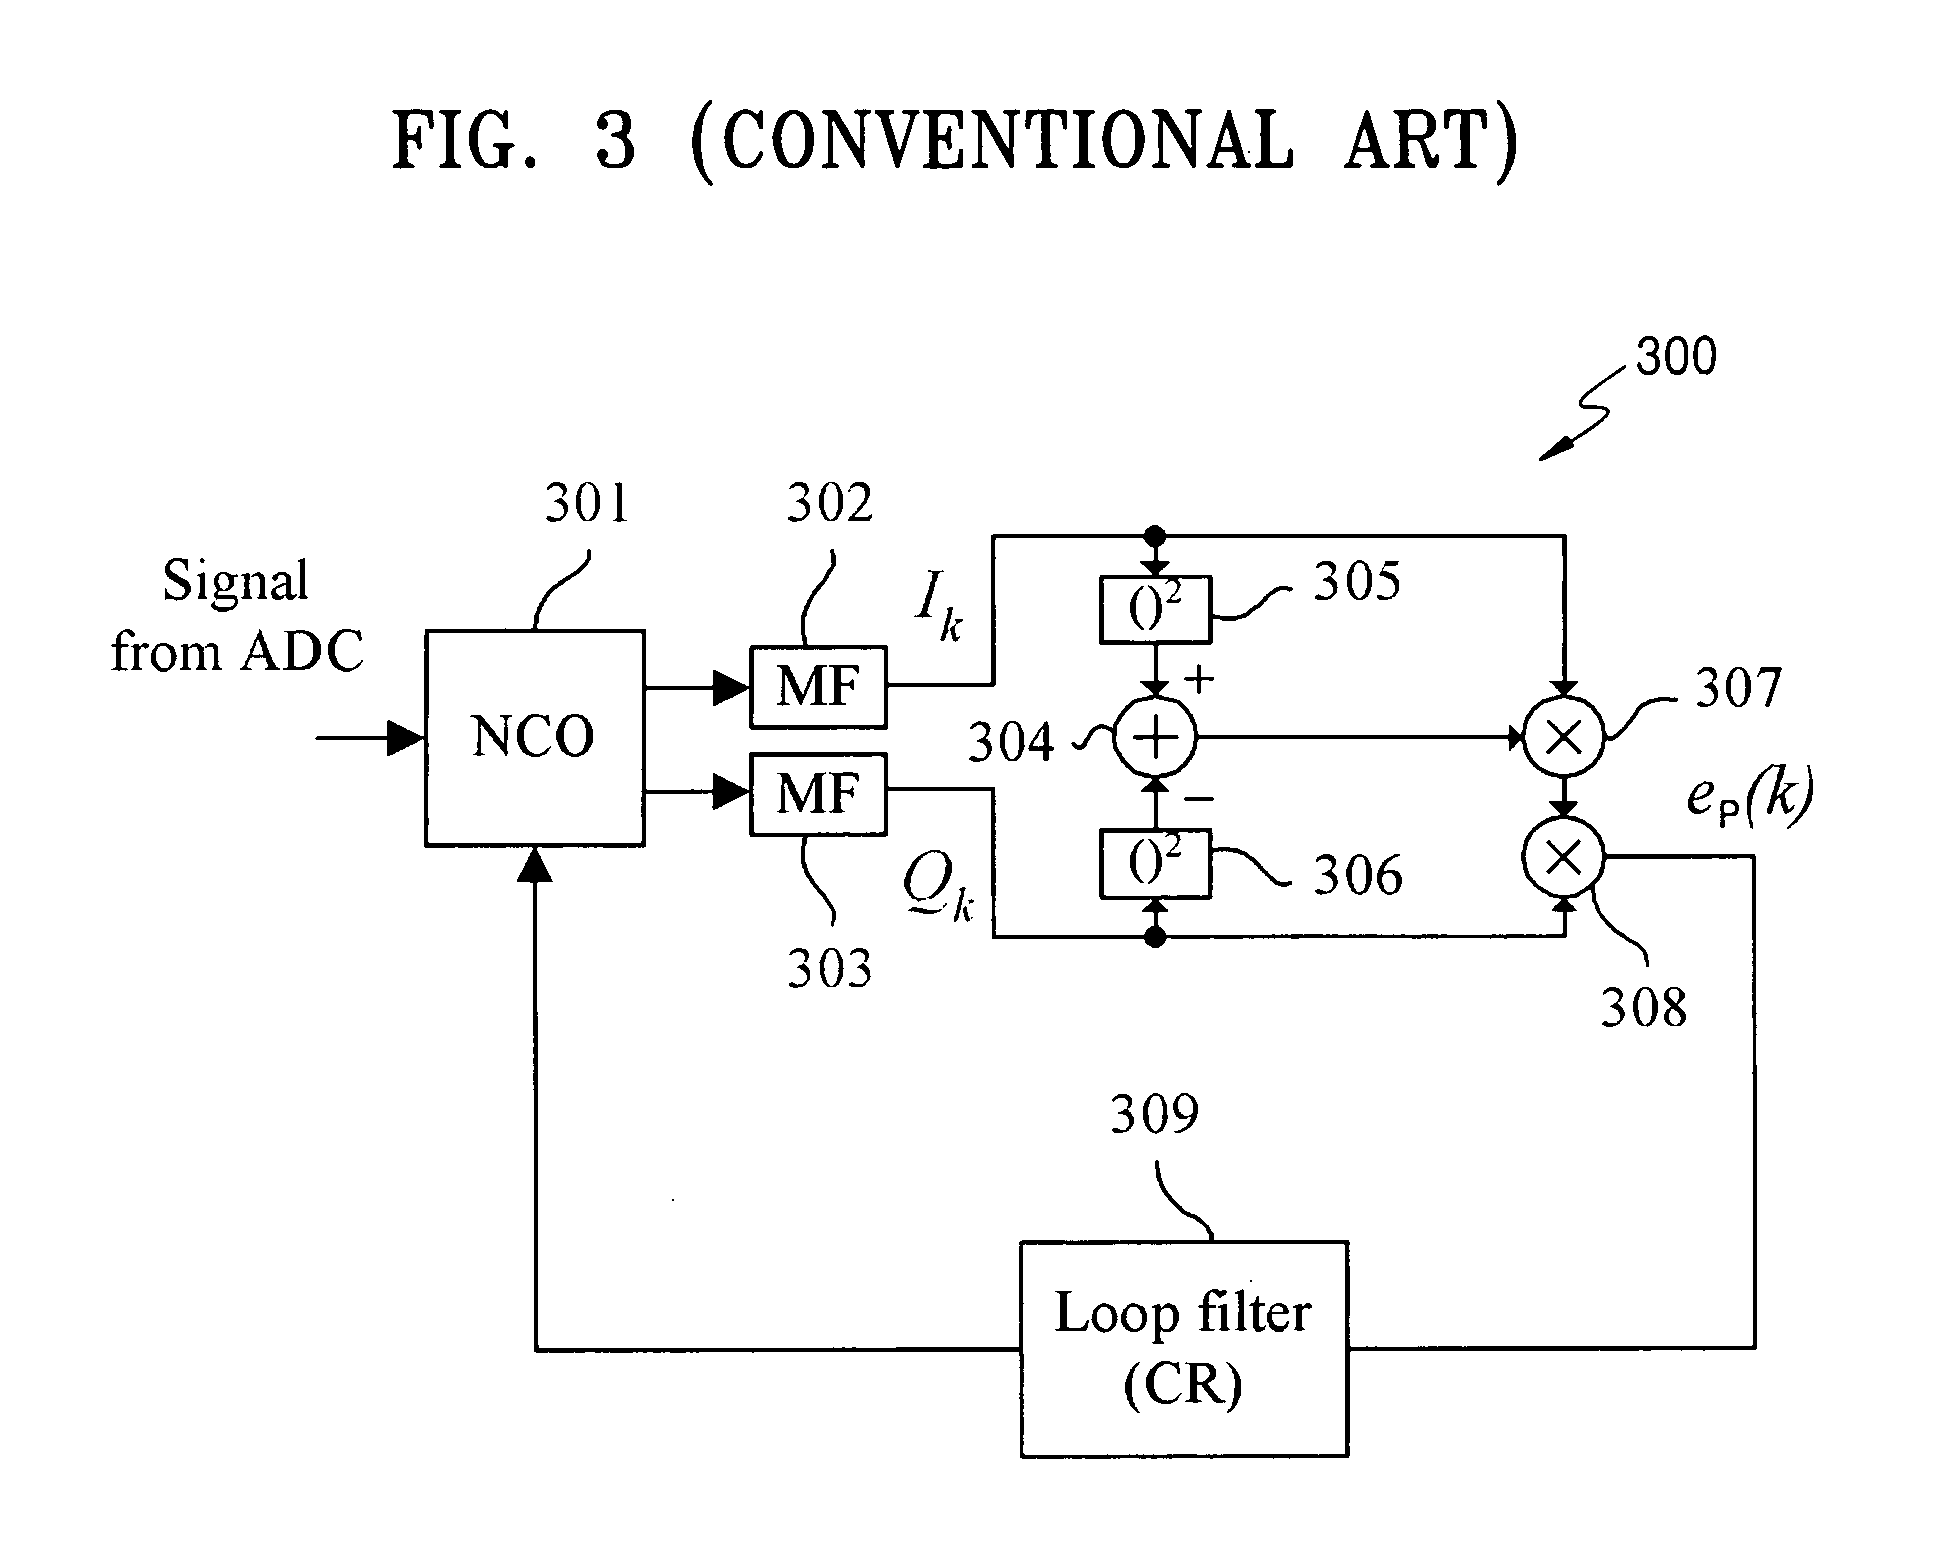 Carrier phase and symbol timing recovery circuit for an ATSC receiver and method of recovering a carrier phase and a symbol timing in received digital signal data